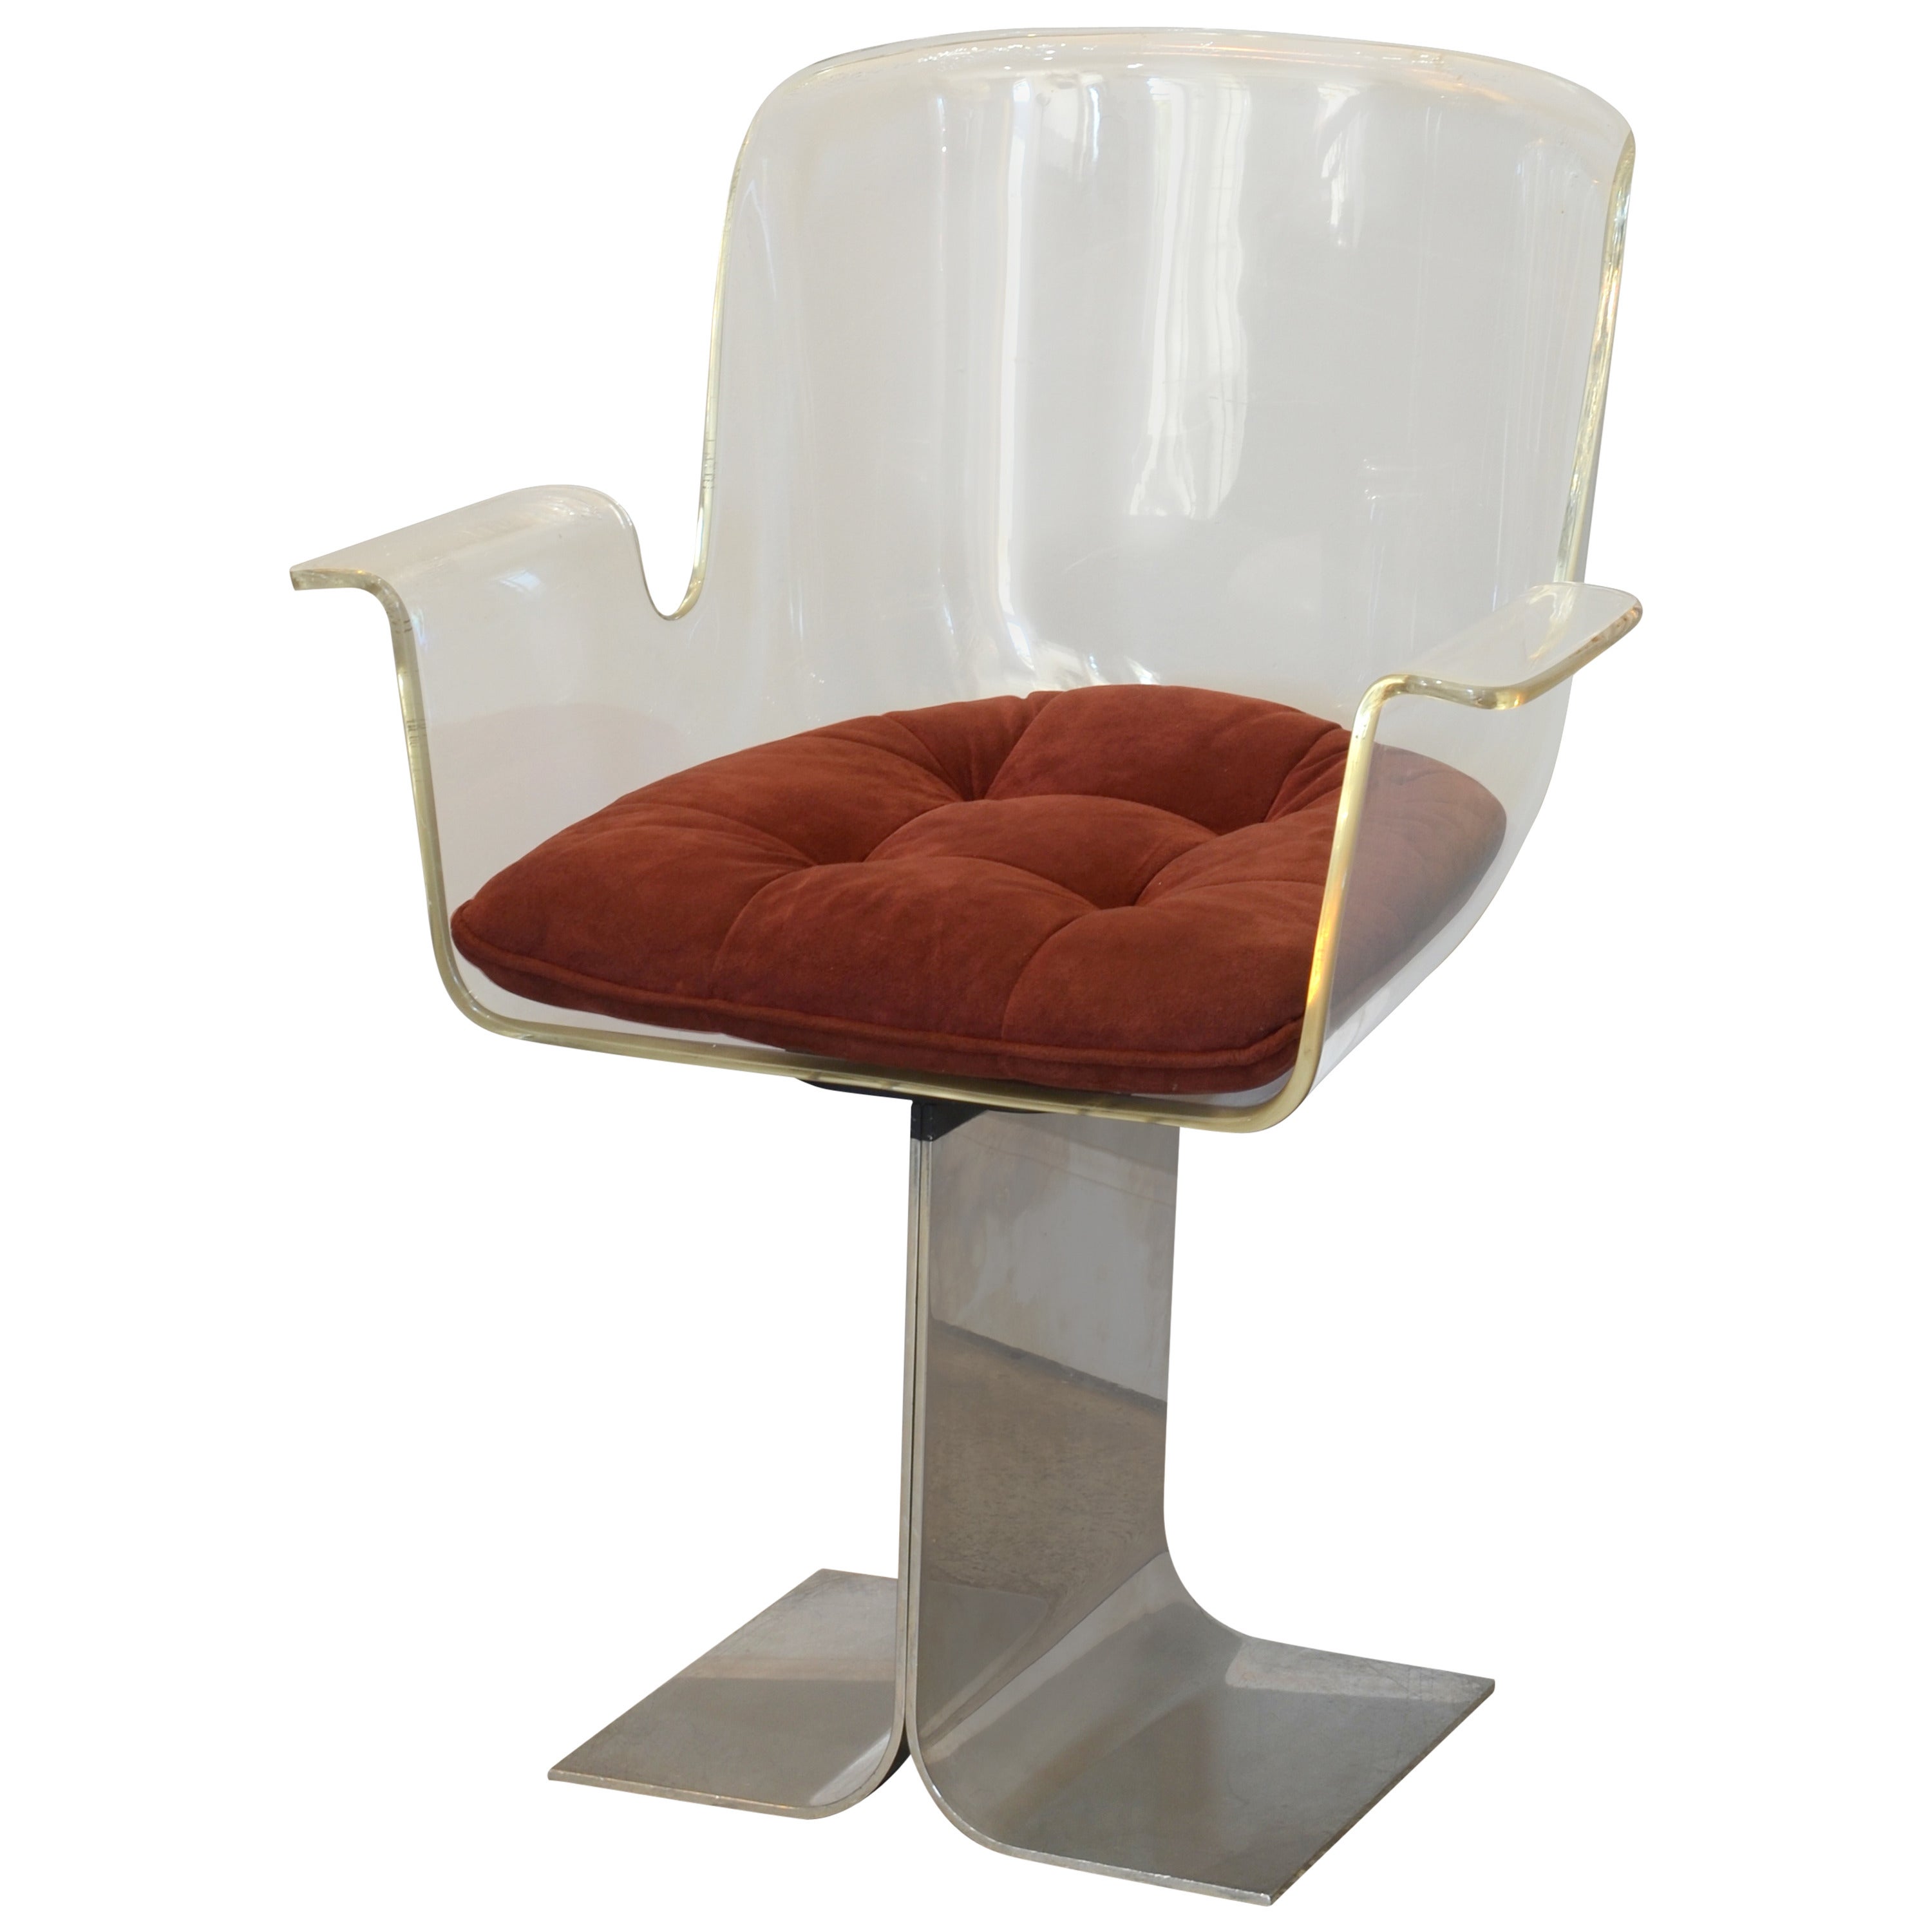 Swiveling Lucite and Polished Aluminum Armchair by Irving Rosen for Pace